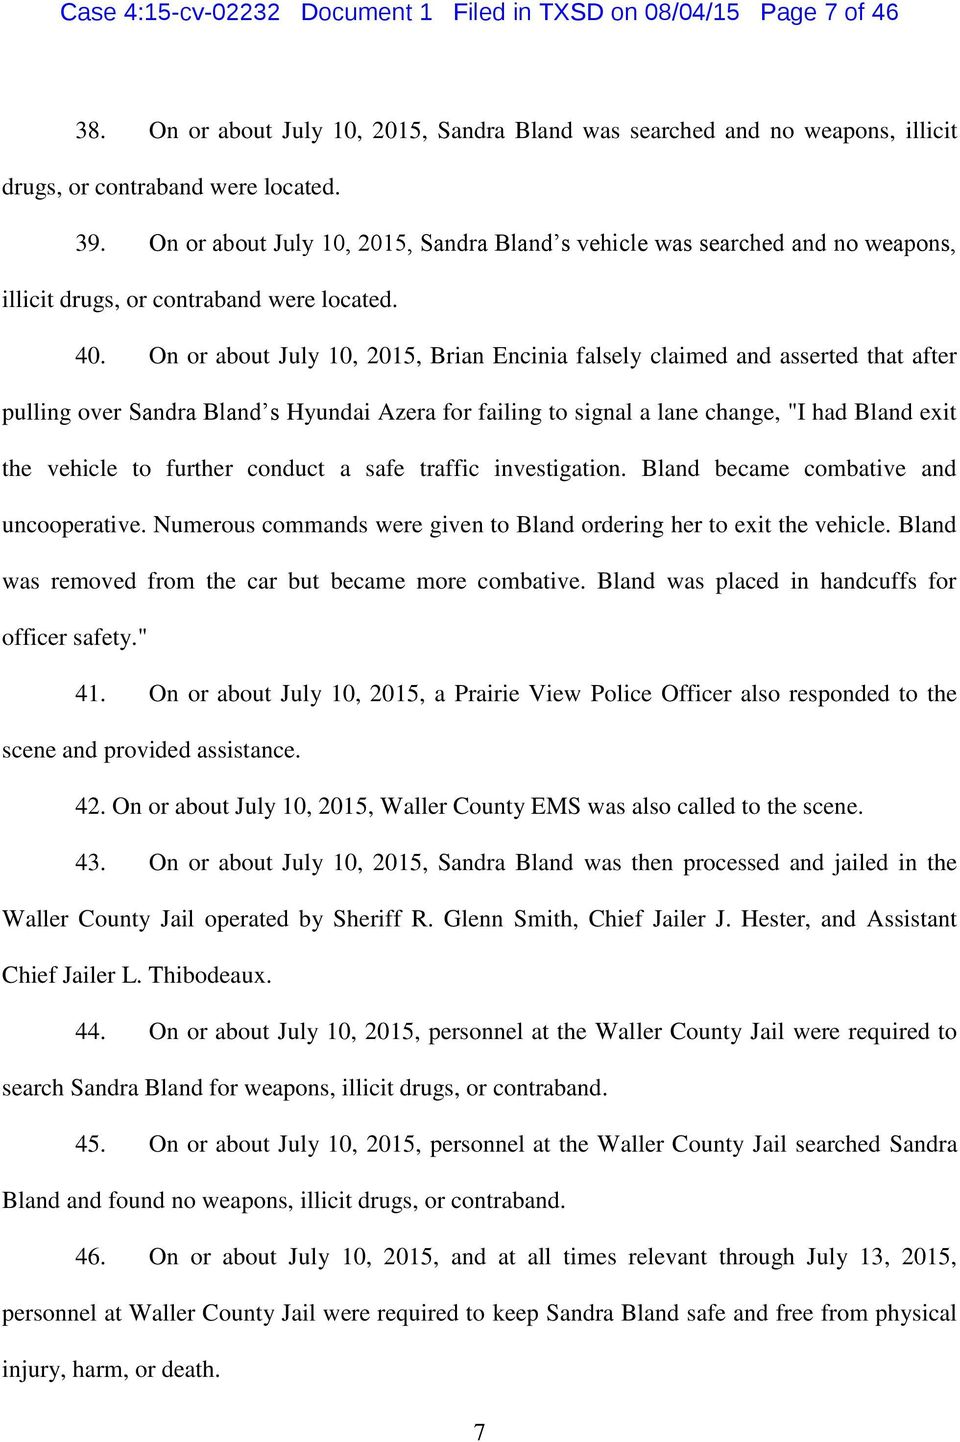 On or about July 10, 2015, Brian Encinia falsely claimed and asserted that after pulling over Sandra Bland s Hyundai Azera for failing to signal a lane change, "I had Bland exit the vehicle to